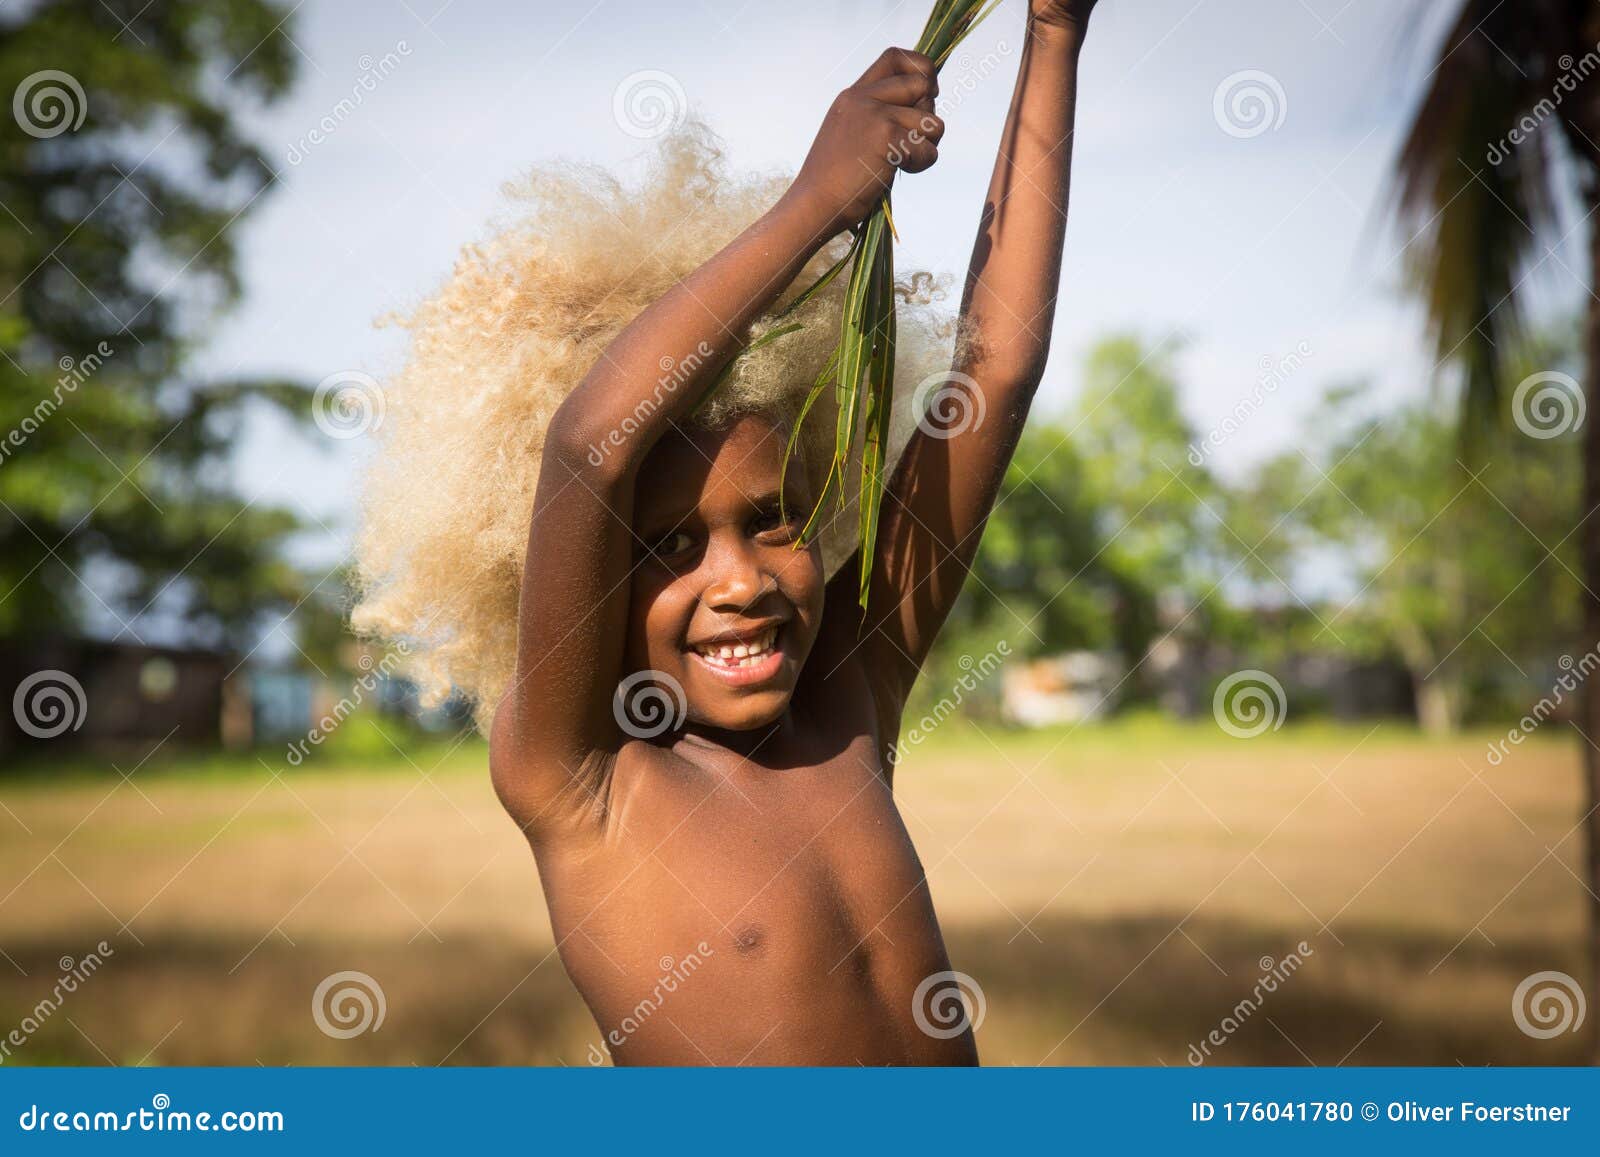 Solomon Islands Boy With Blond Hair And Coloured Skin Editorial Image Image Of Person Blonde 176041780